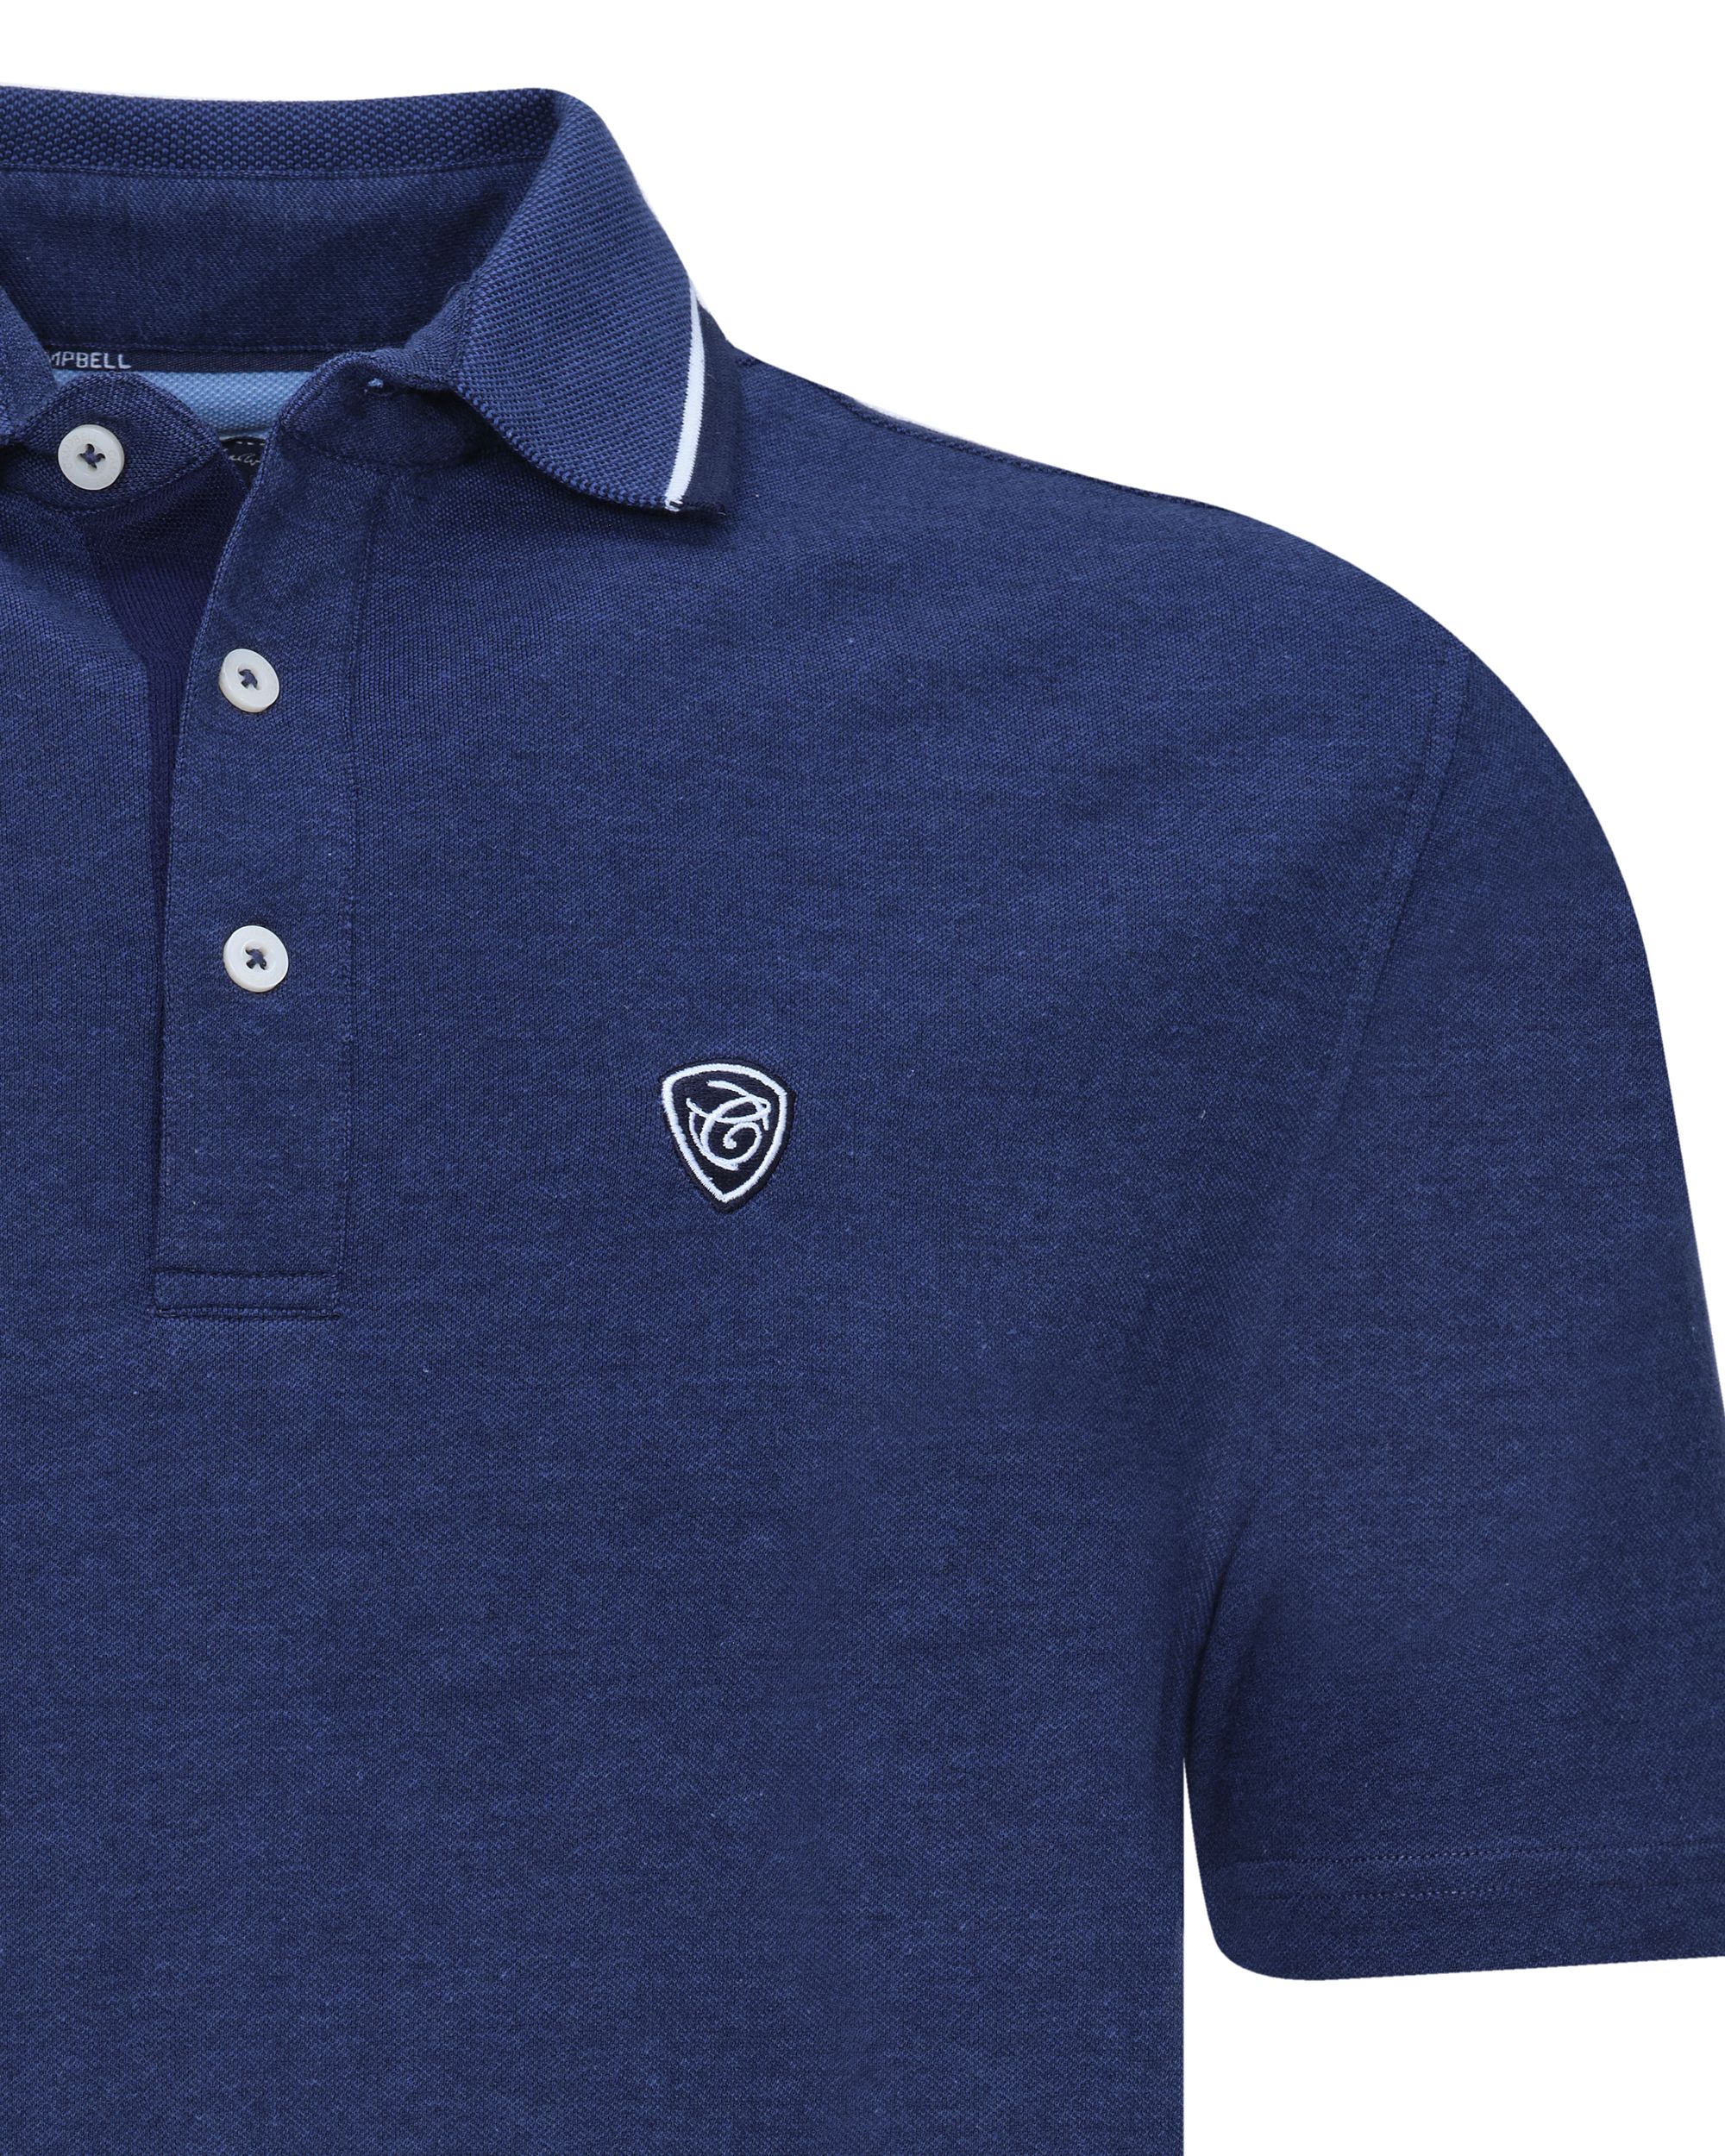 Campbell Stanson Polo SS NAVY 081528-001-L